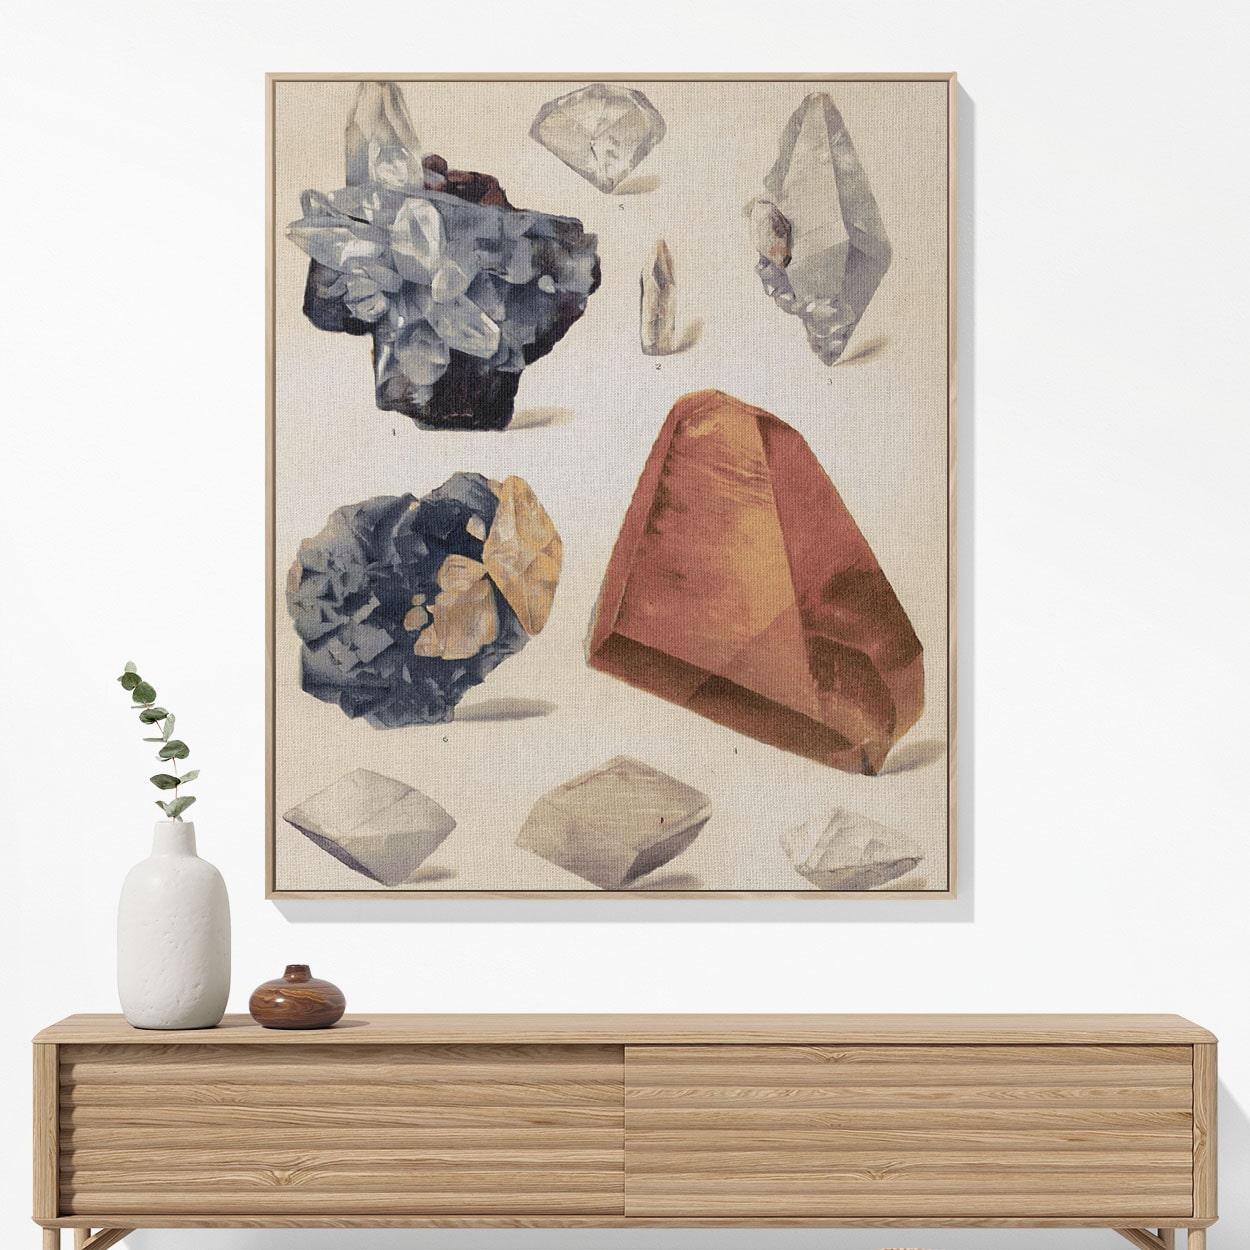 Crystals Woven Blanket Woven Blanket Hanging on a Wall as Framed Wall Art